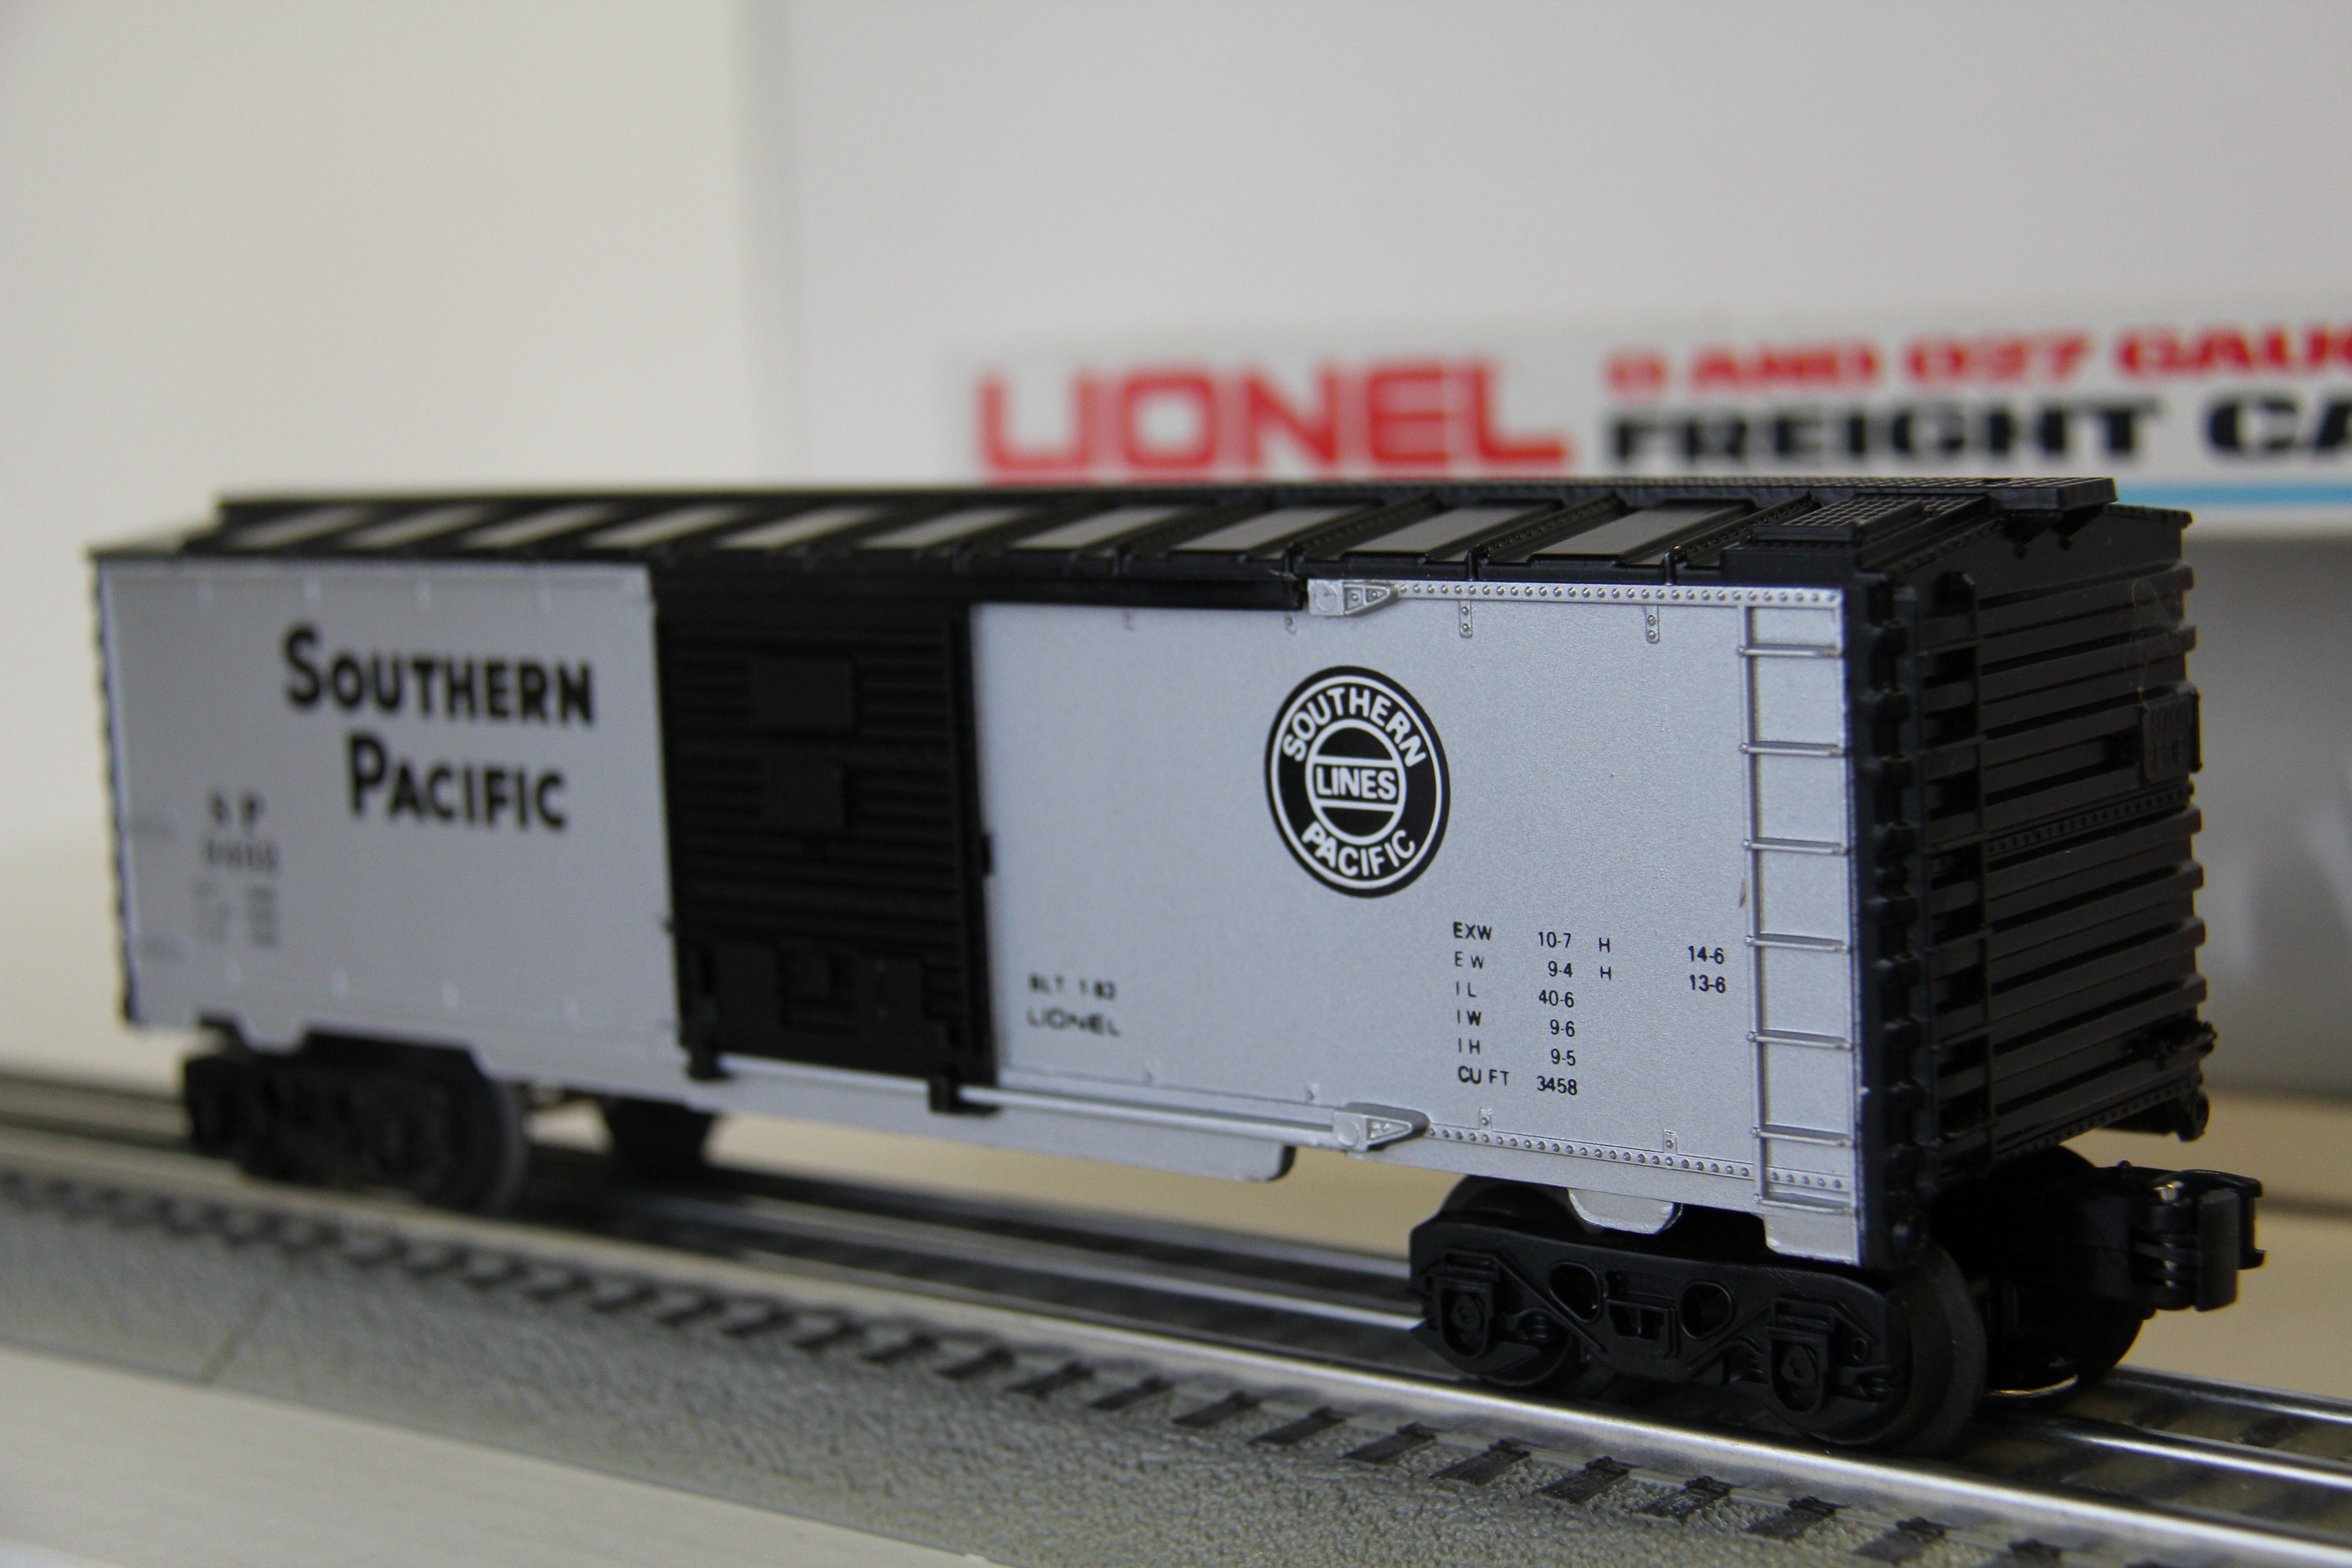 Lionel 6-9462 Southern Pacific Box Car-Second hand-M3875